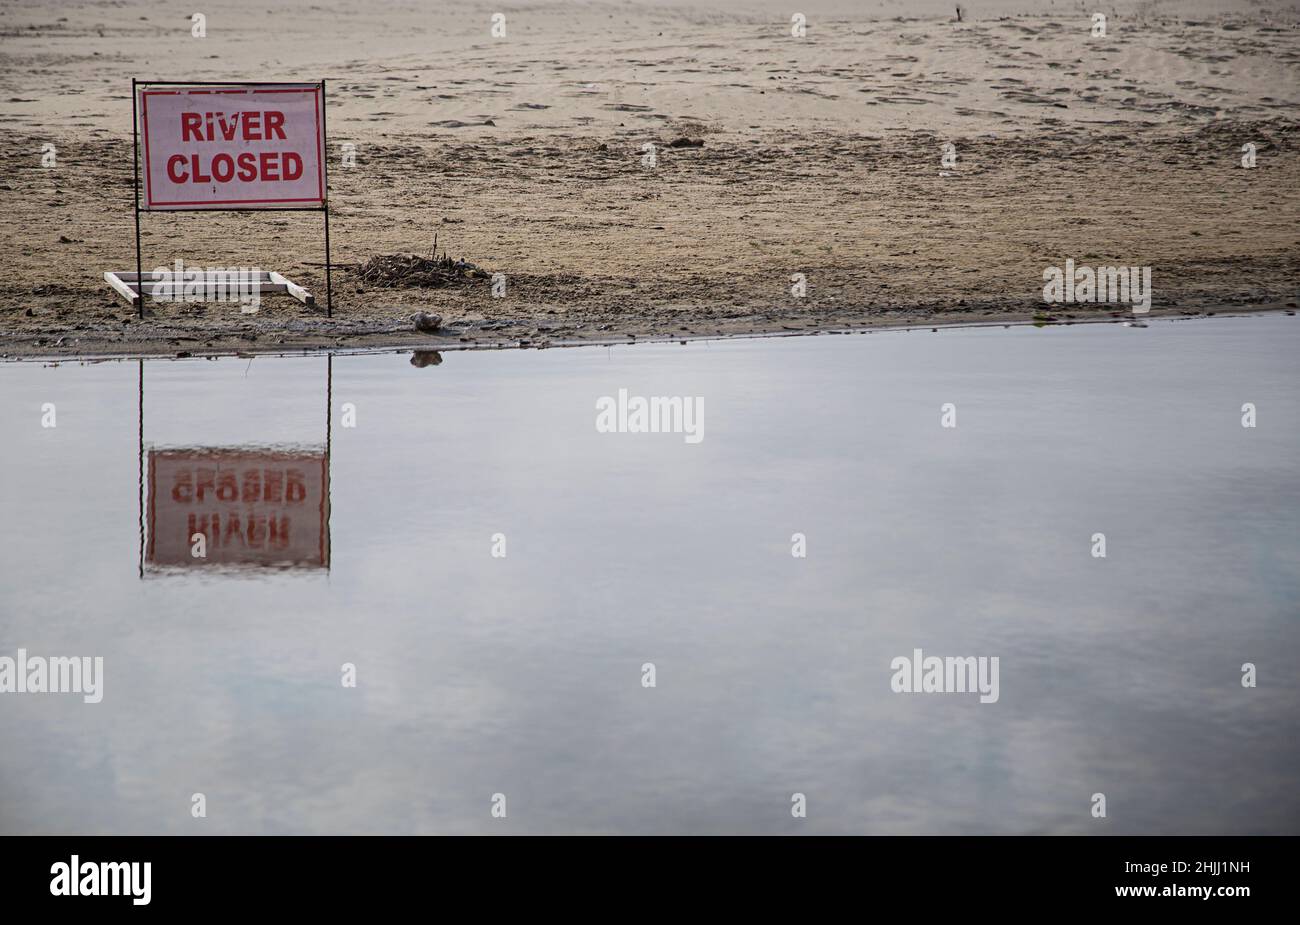 River closed sign on a peaceful day Stock Photo